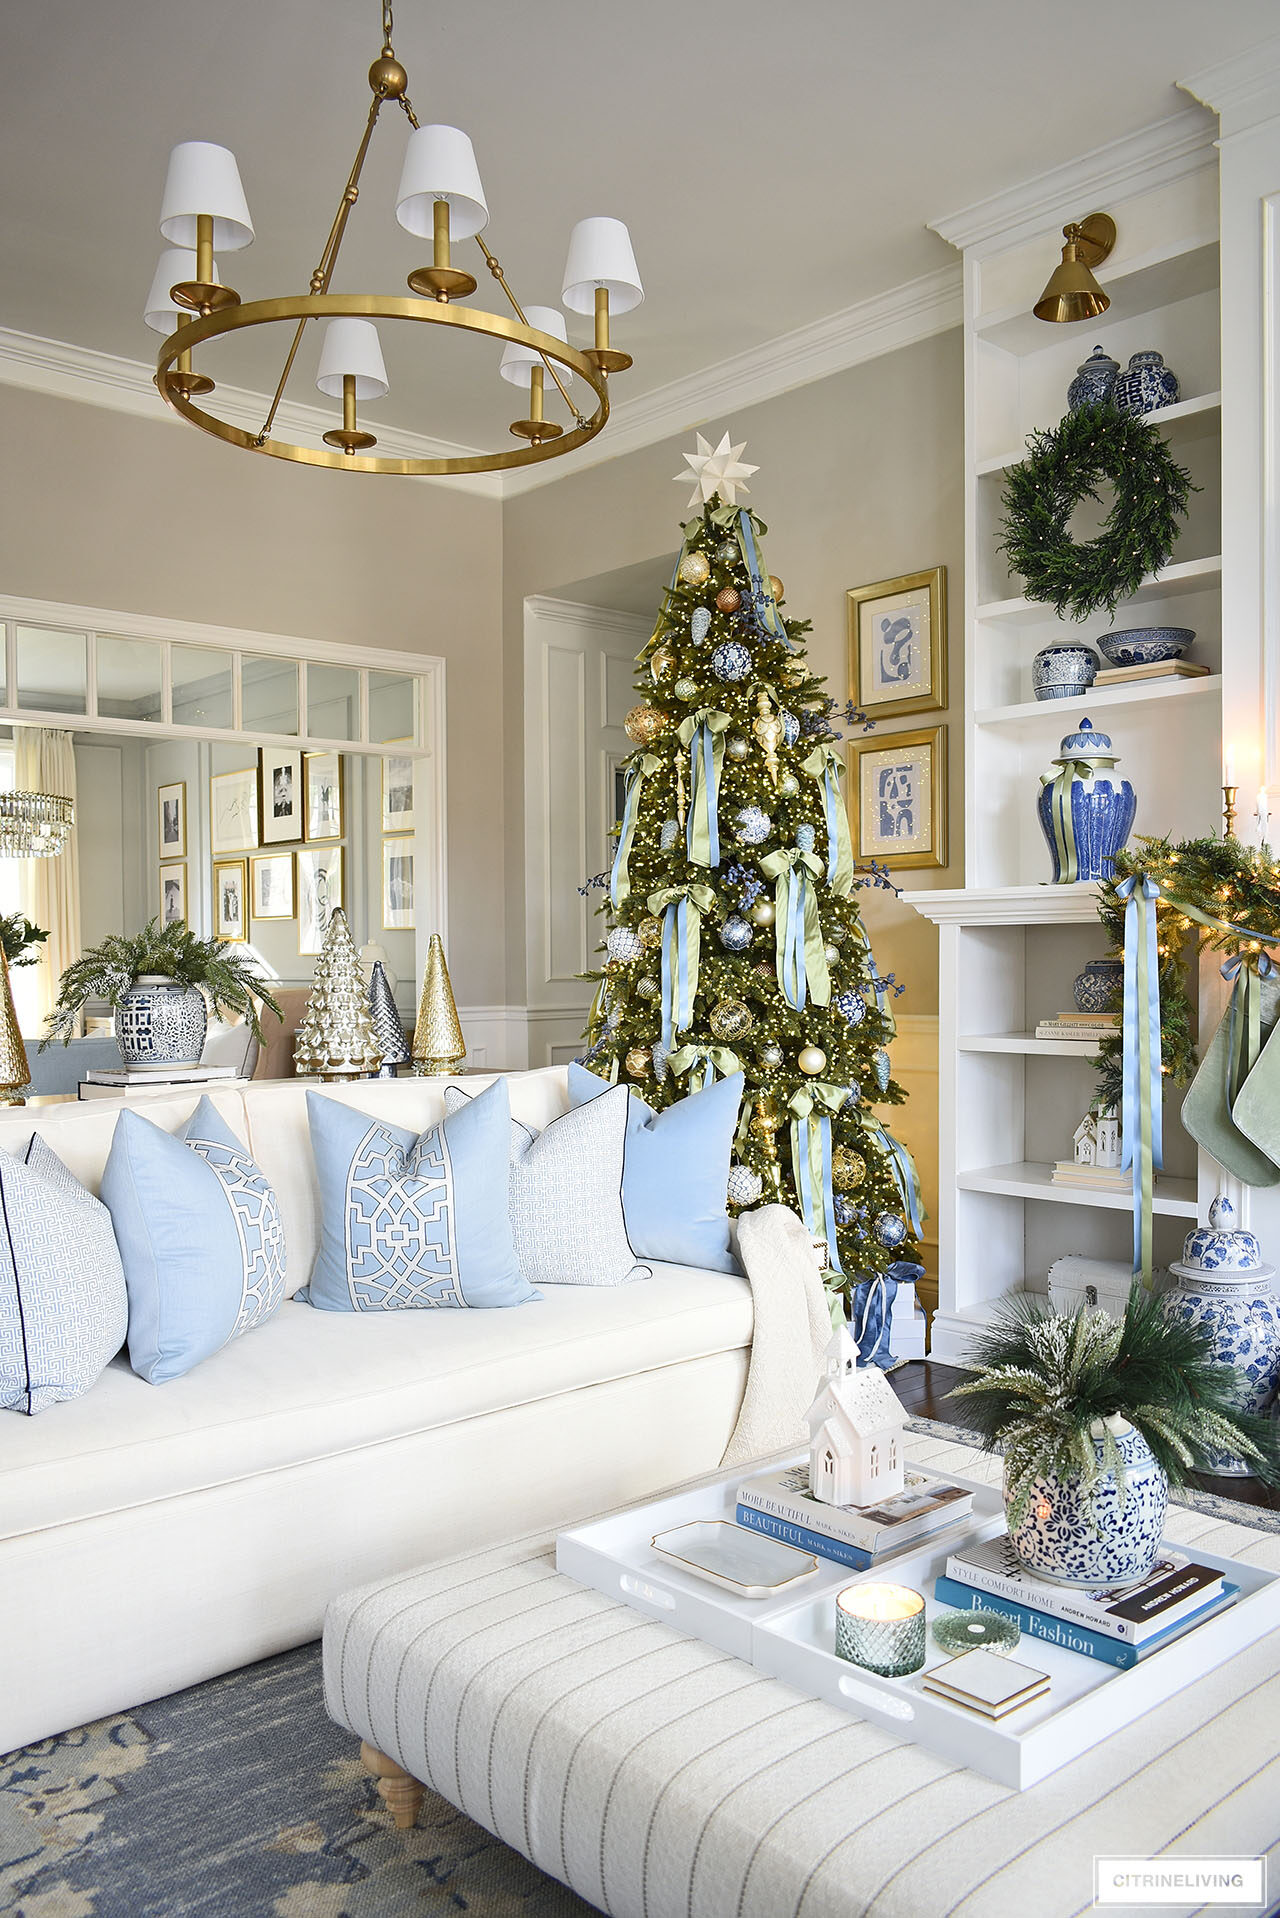 A corner of a living room with a Christmas tree decorated in light green and blue bows, a white sofa is styled with blue and white pillows.